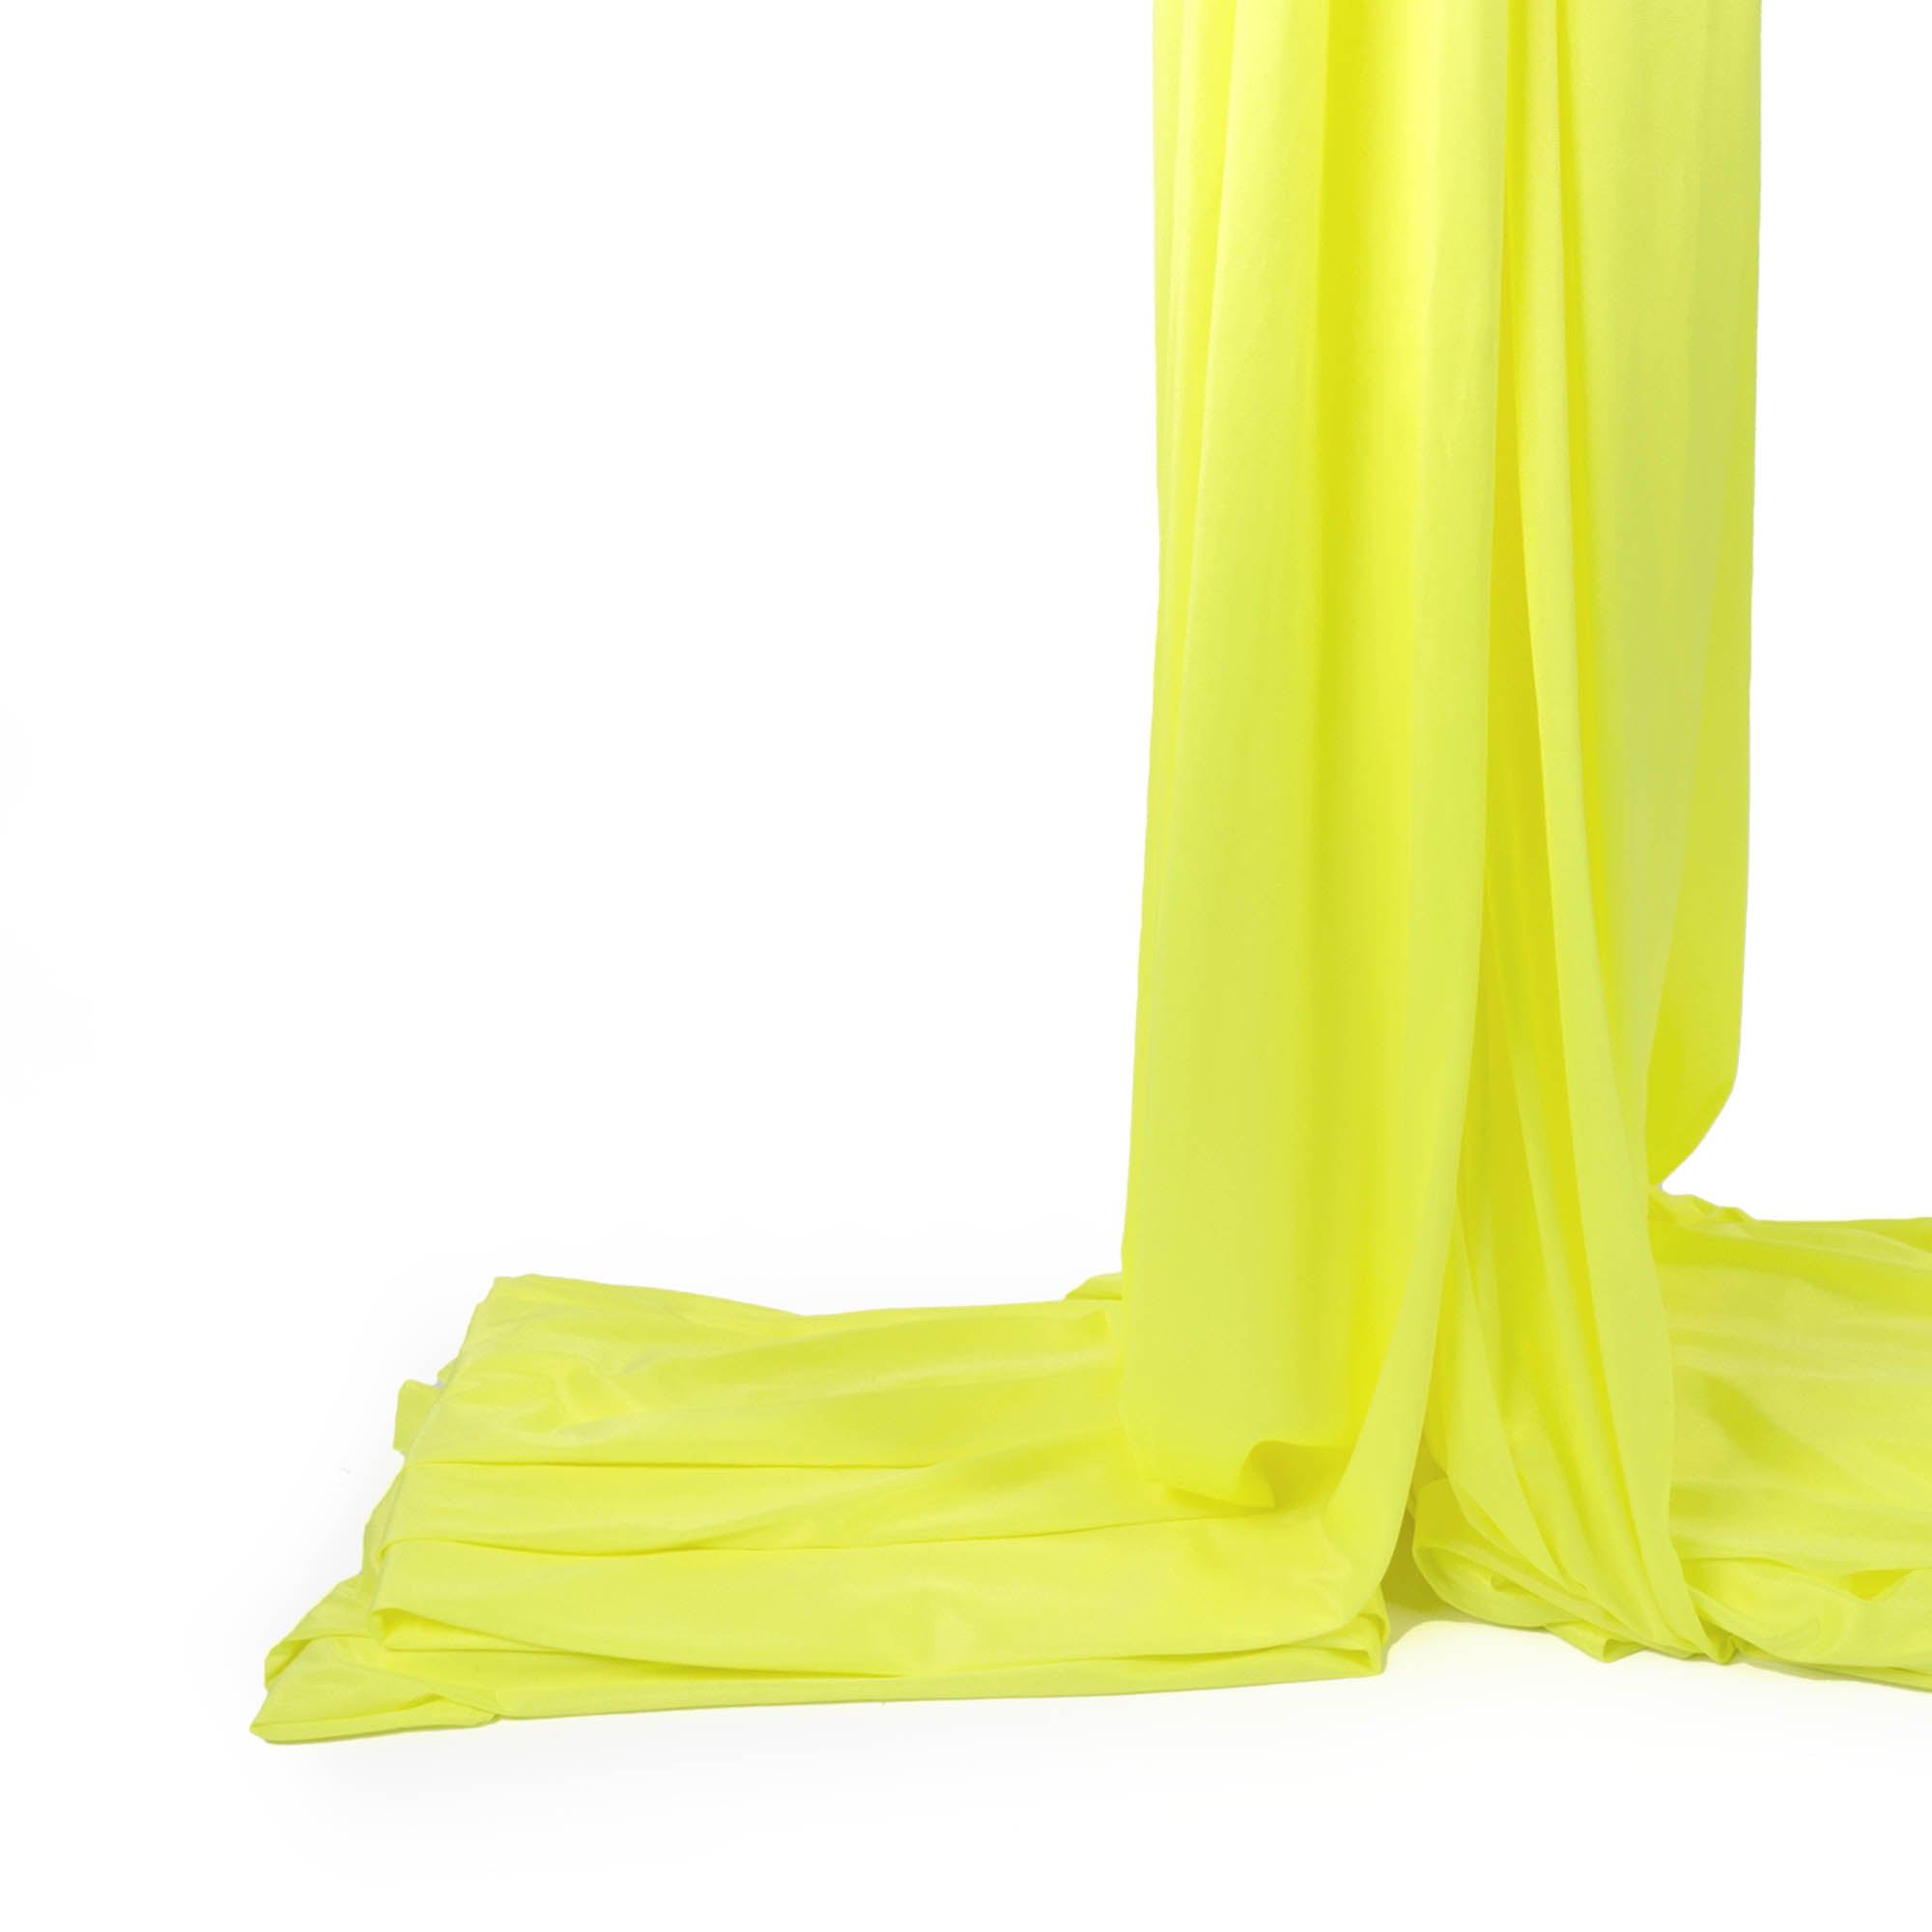 End of silk neon yellow